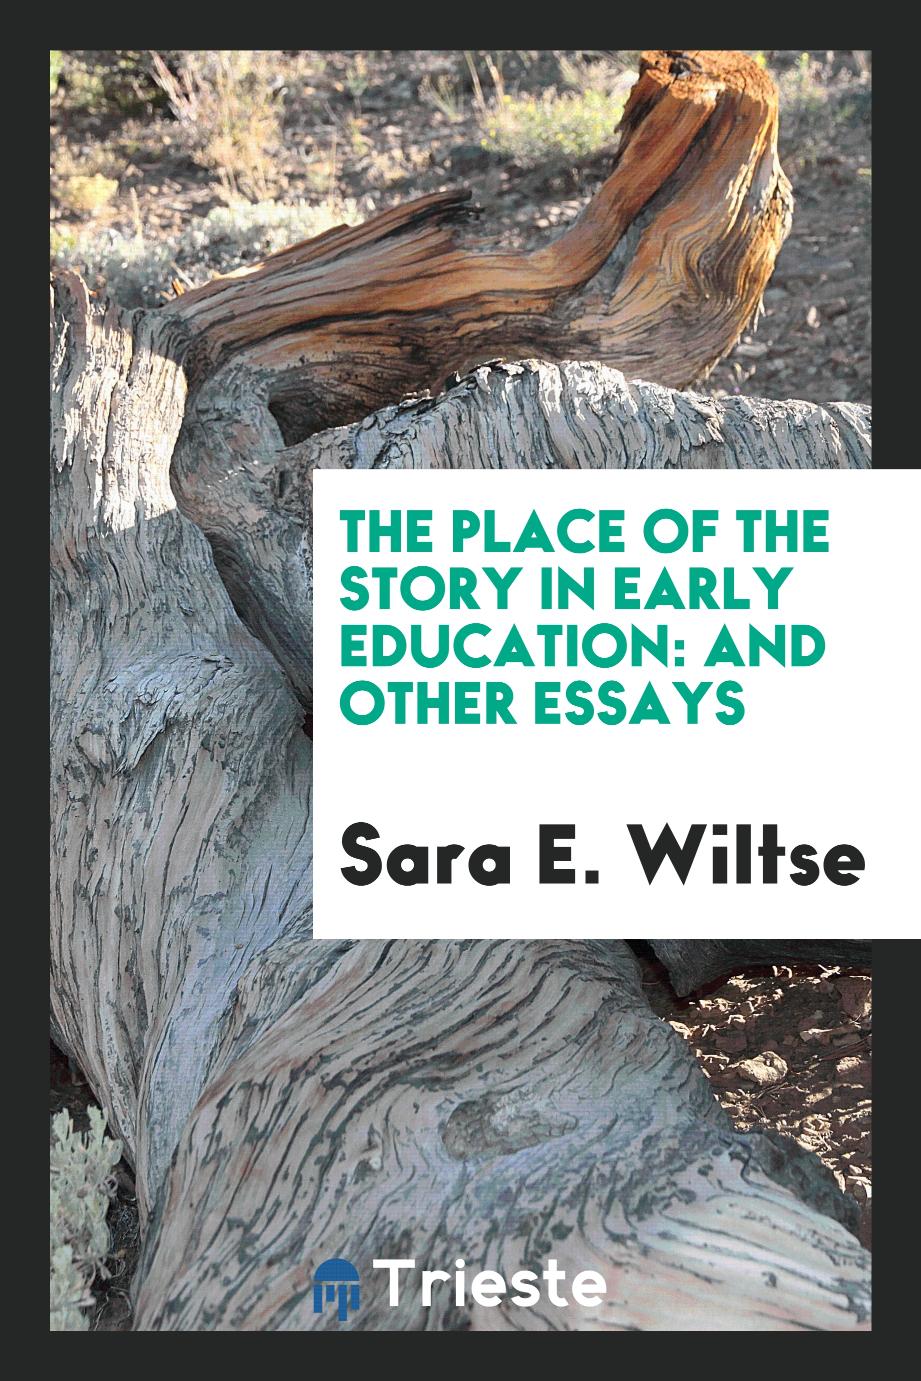 The Place of the Story in Early Education: And Other Essays